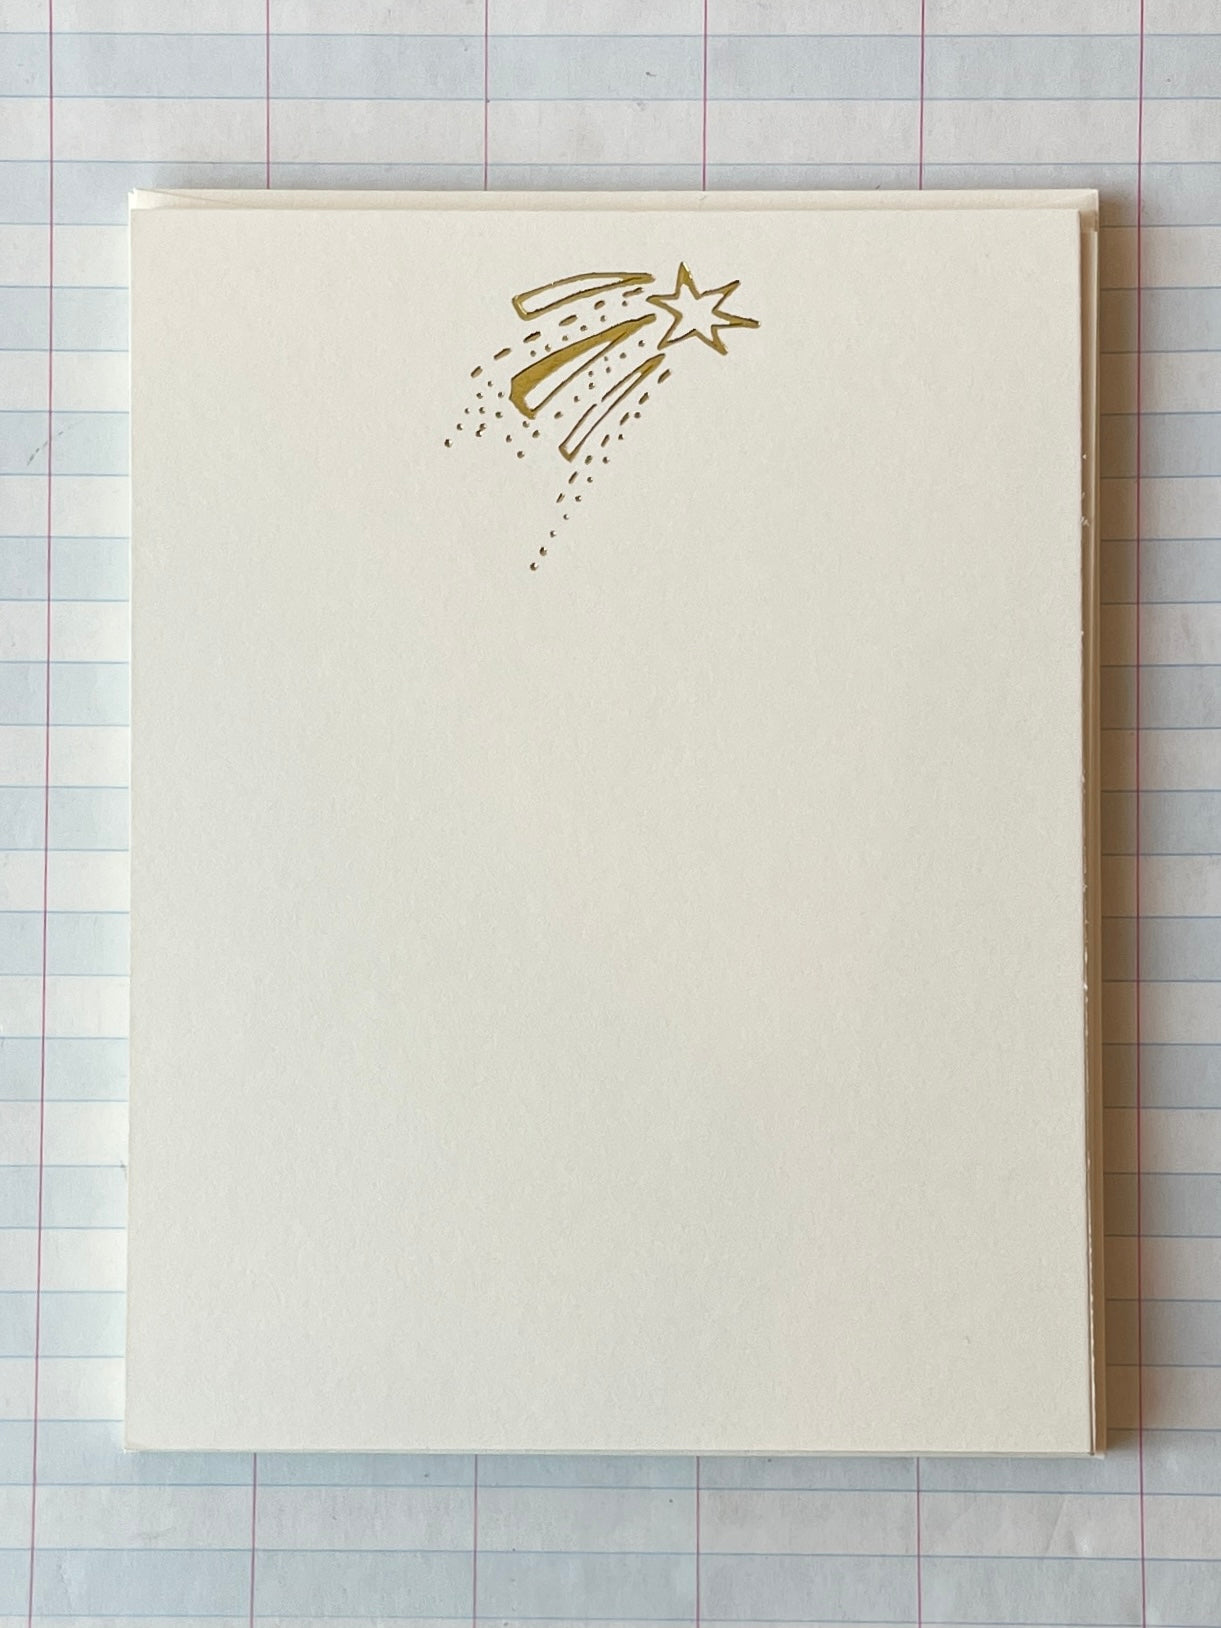 Shooting Star by Skippy Cotton Foil Pressed Stationery